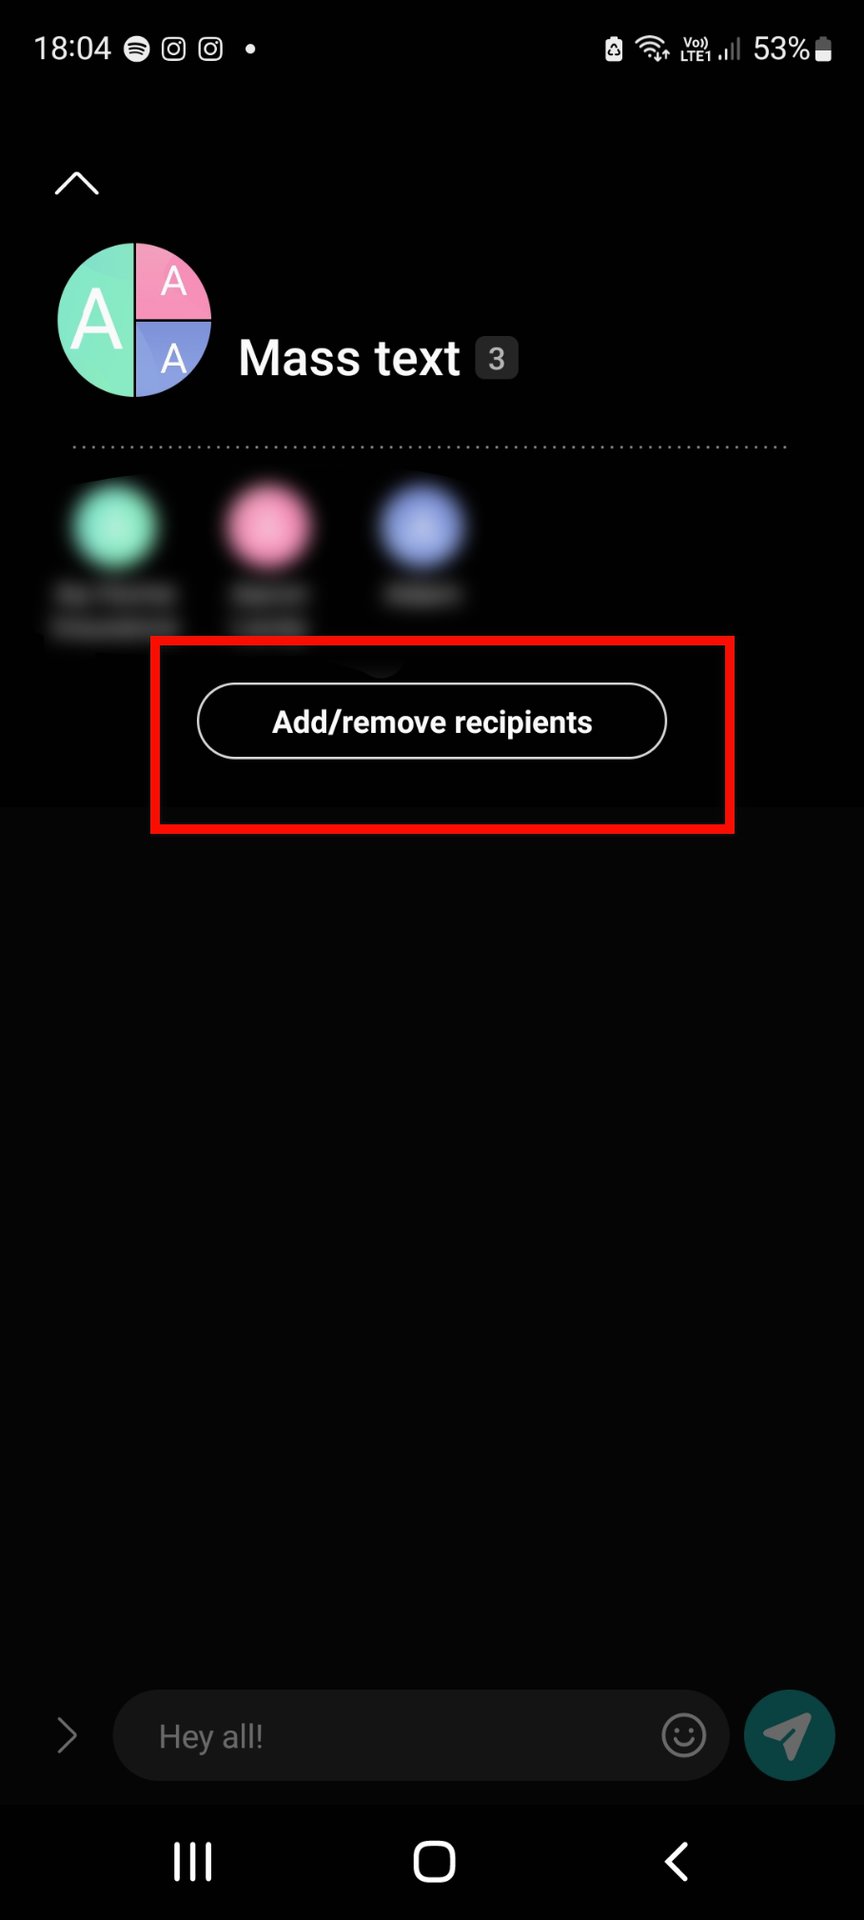 Add/remove recipients from group text on Android.